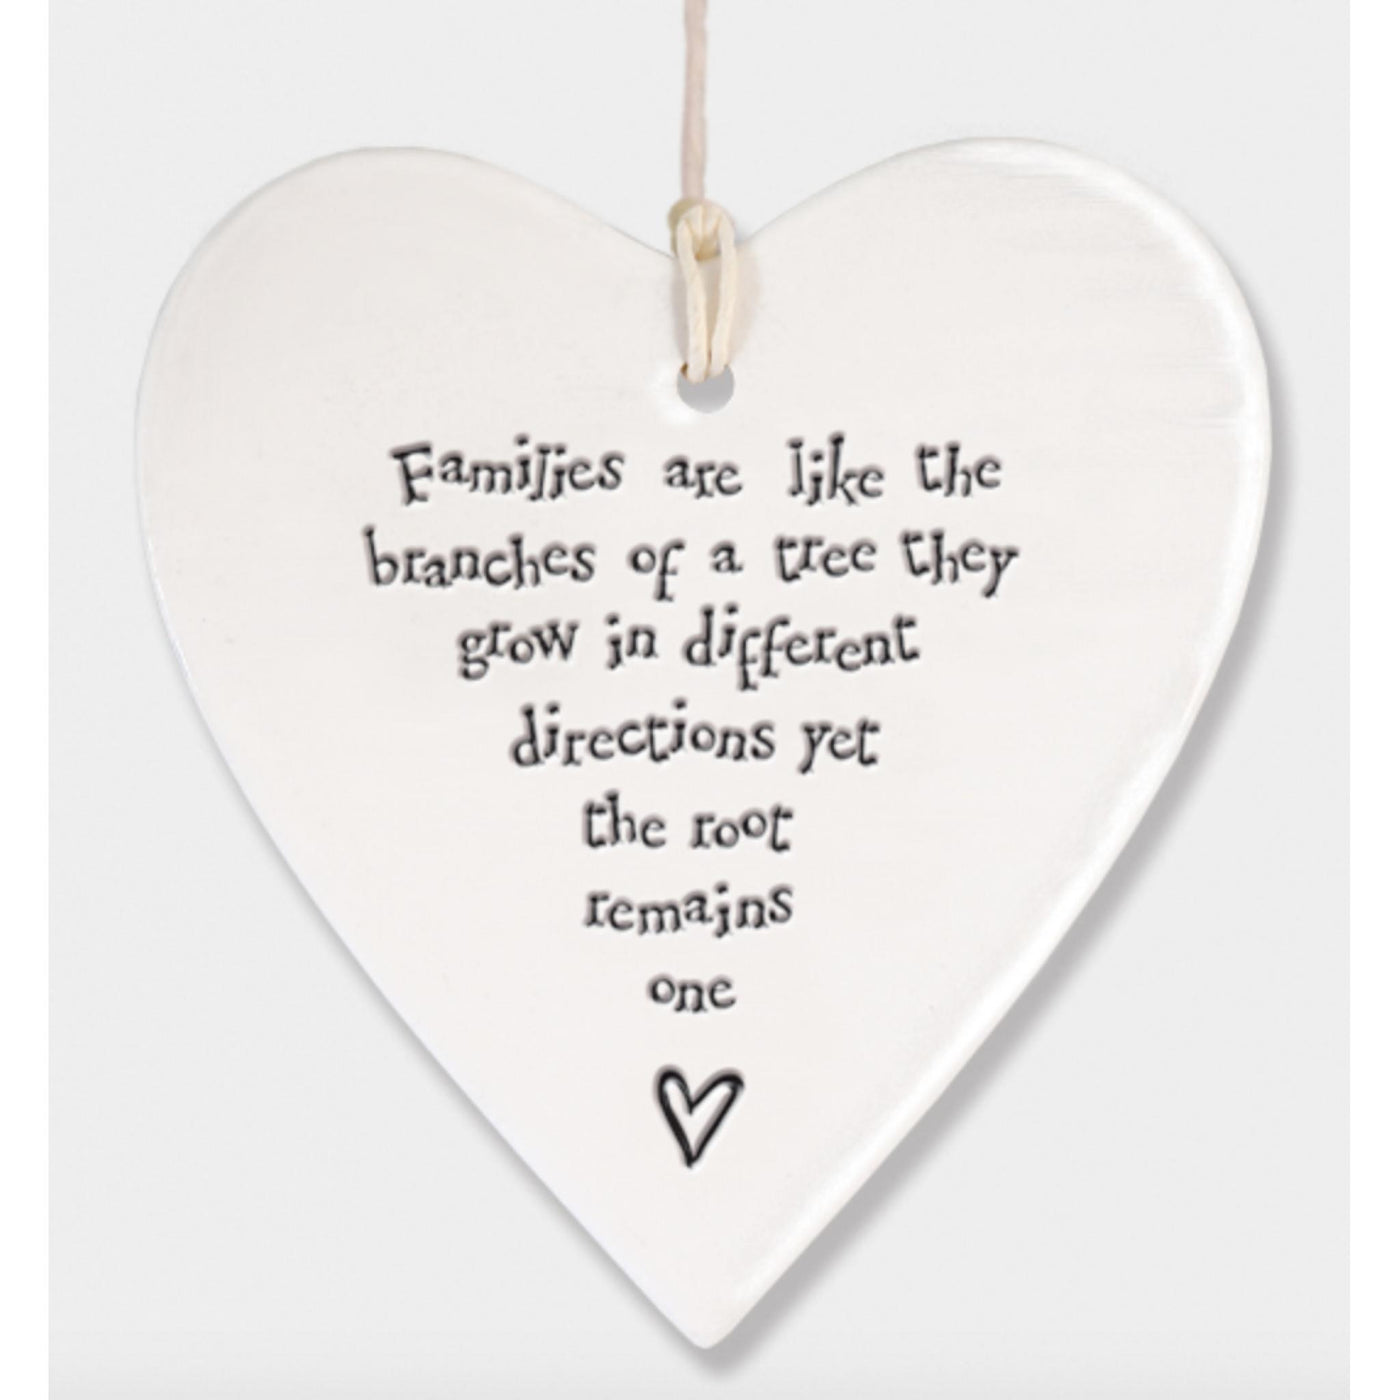 East of India Porcelain Round Hanging Heart - Families are Like